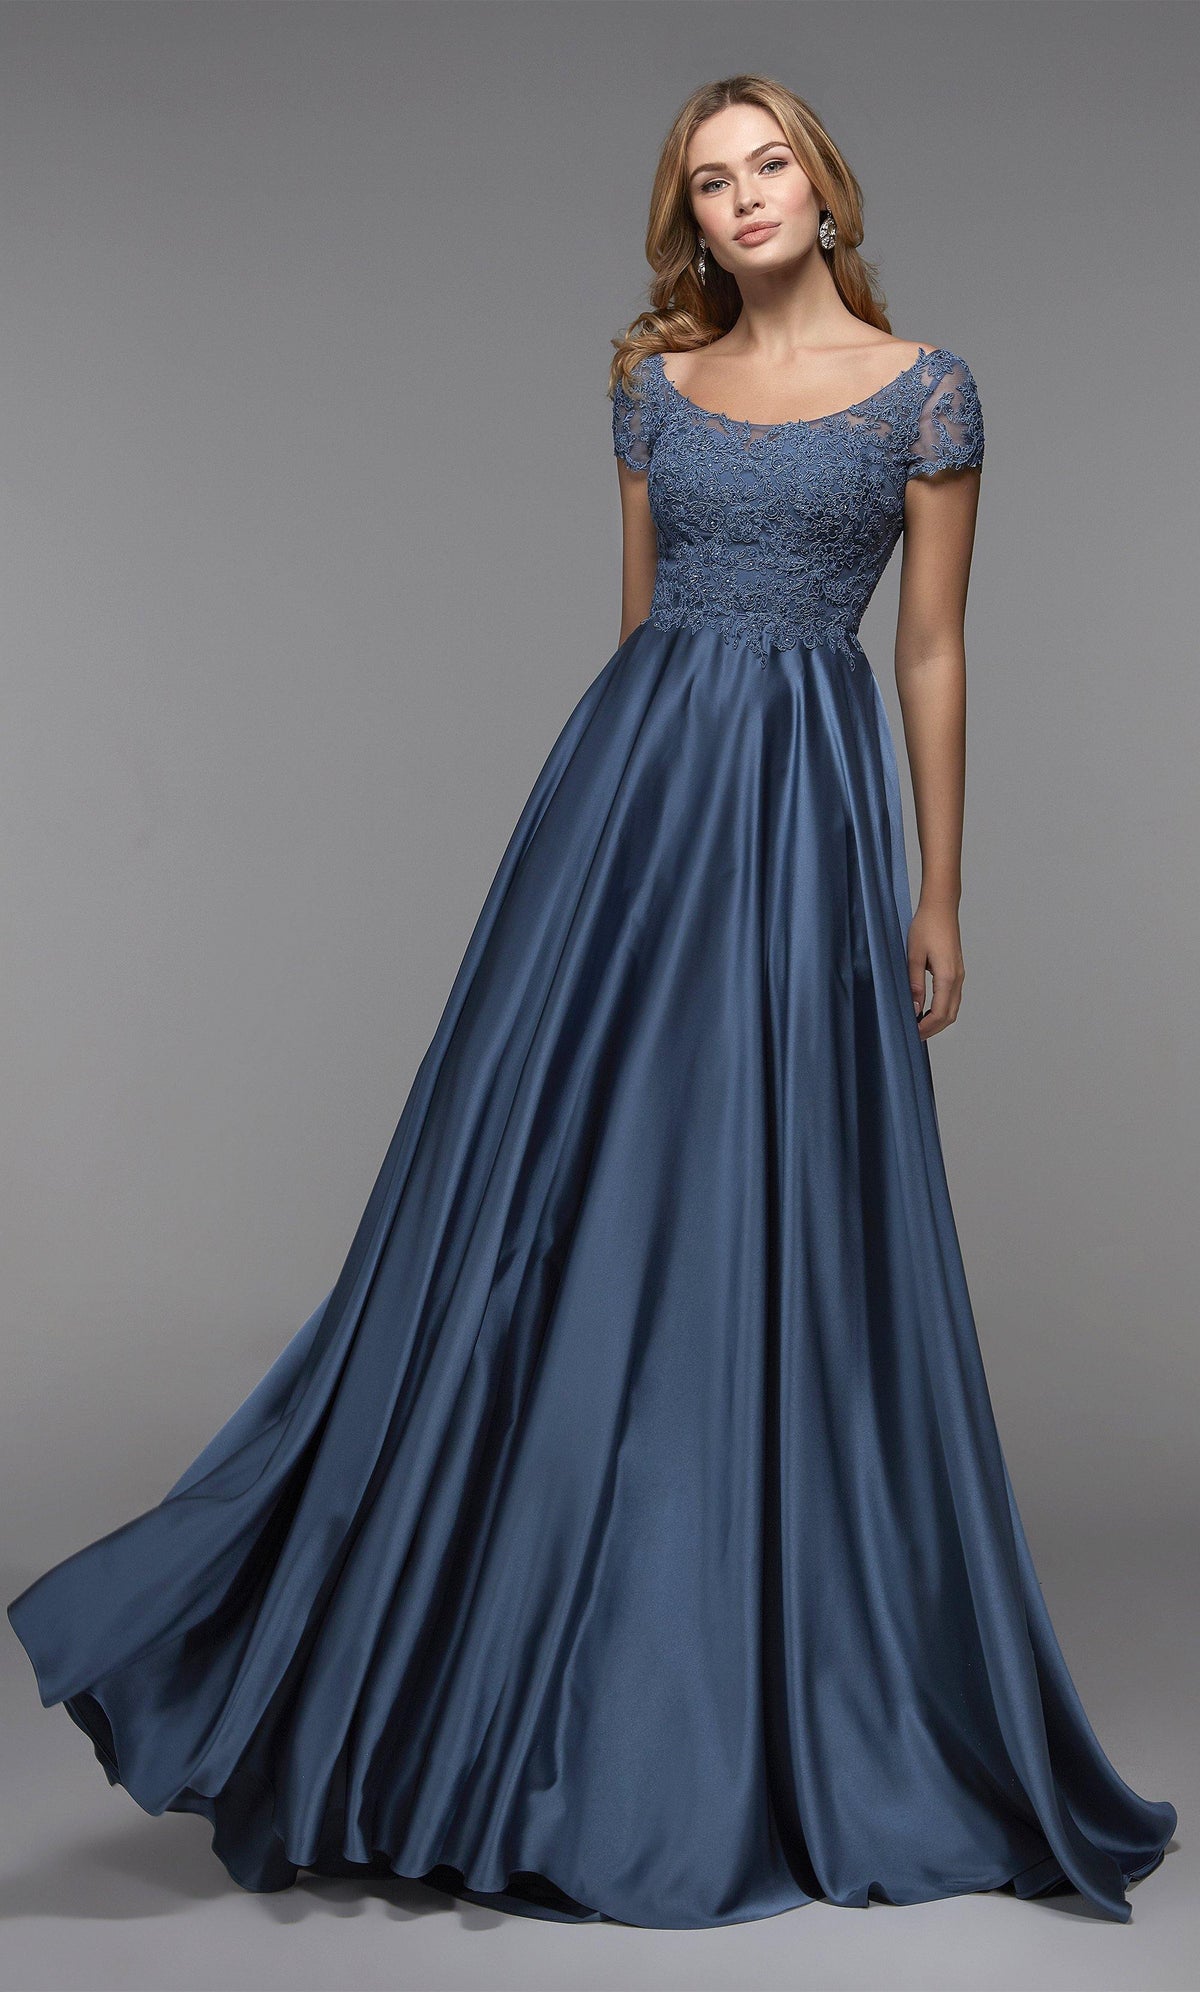 Blue satin evening dress with a scoop neck, short sleeves, and lace bodice